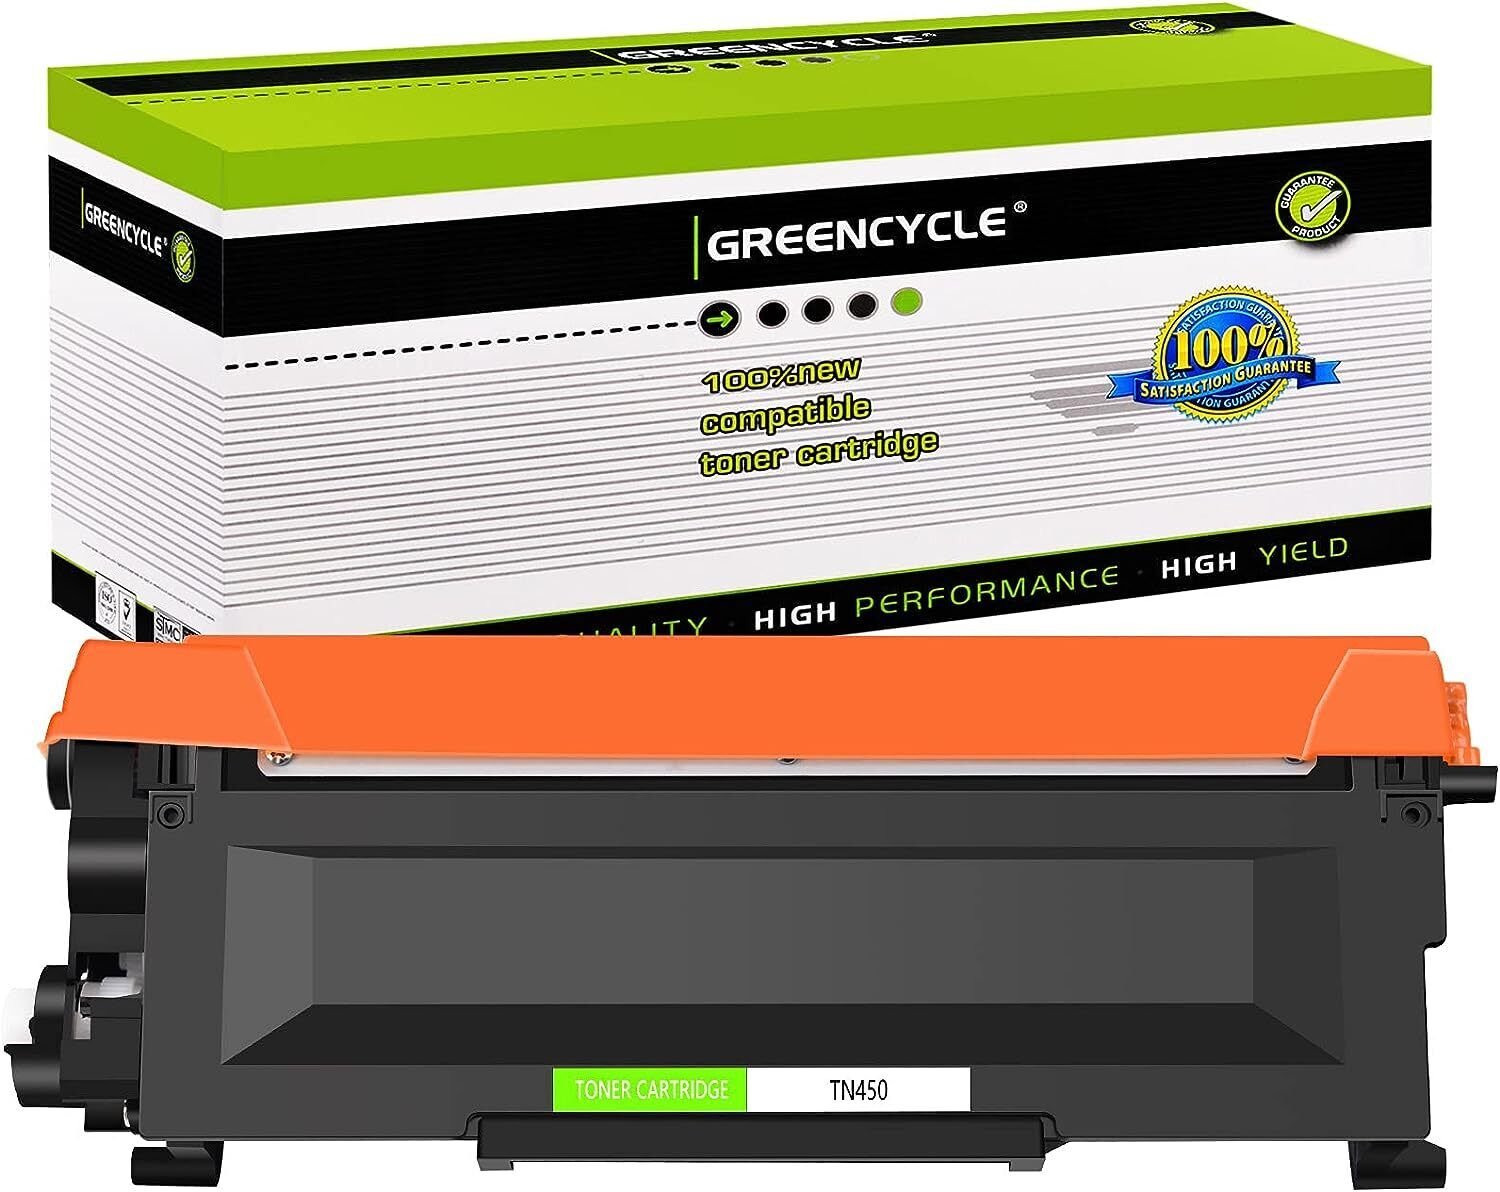 1PK Greencycle black Compatible Toner Cartridge for Brother TN450 TN420 HL-2230